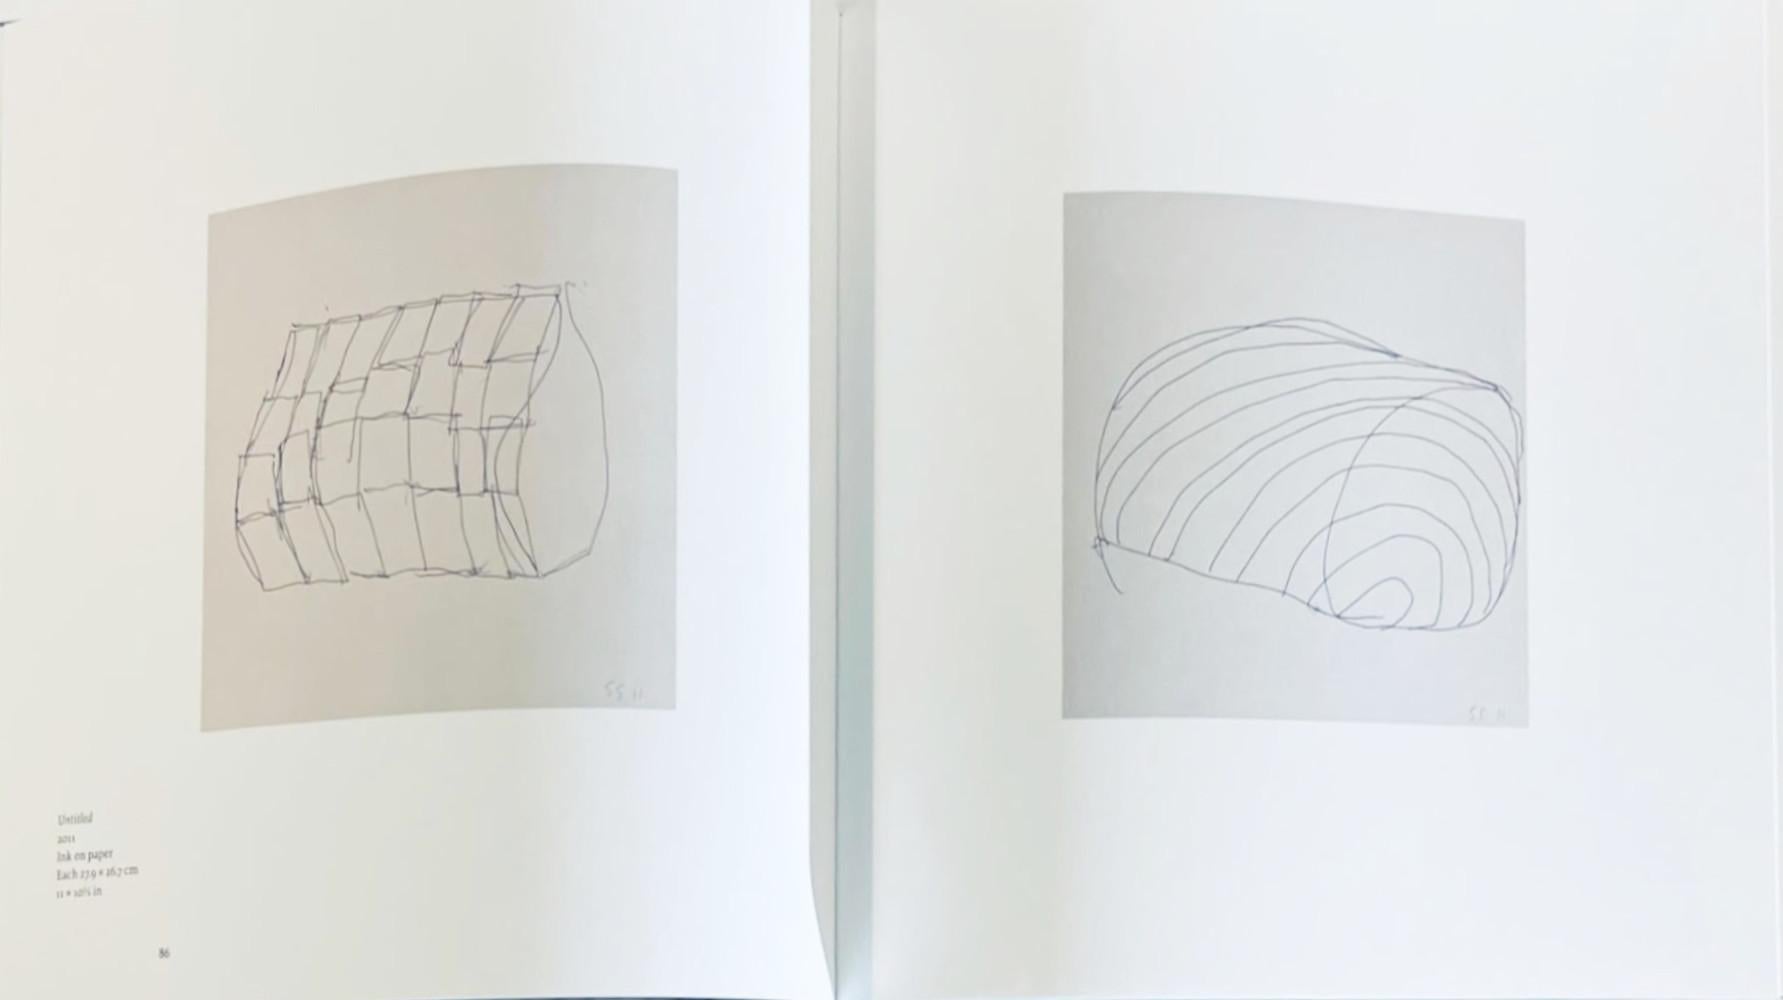 Different Places, Hardback monograph (Hand signed and inscribed by Sean Scully) For Sale 14